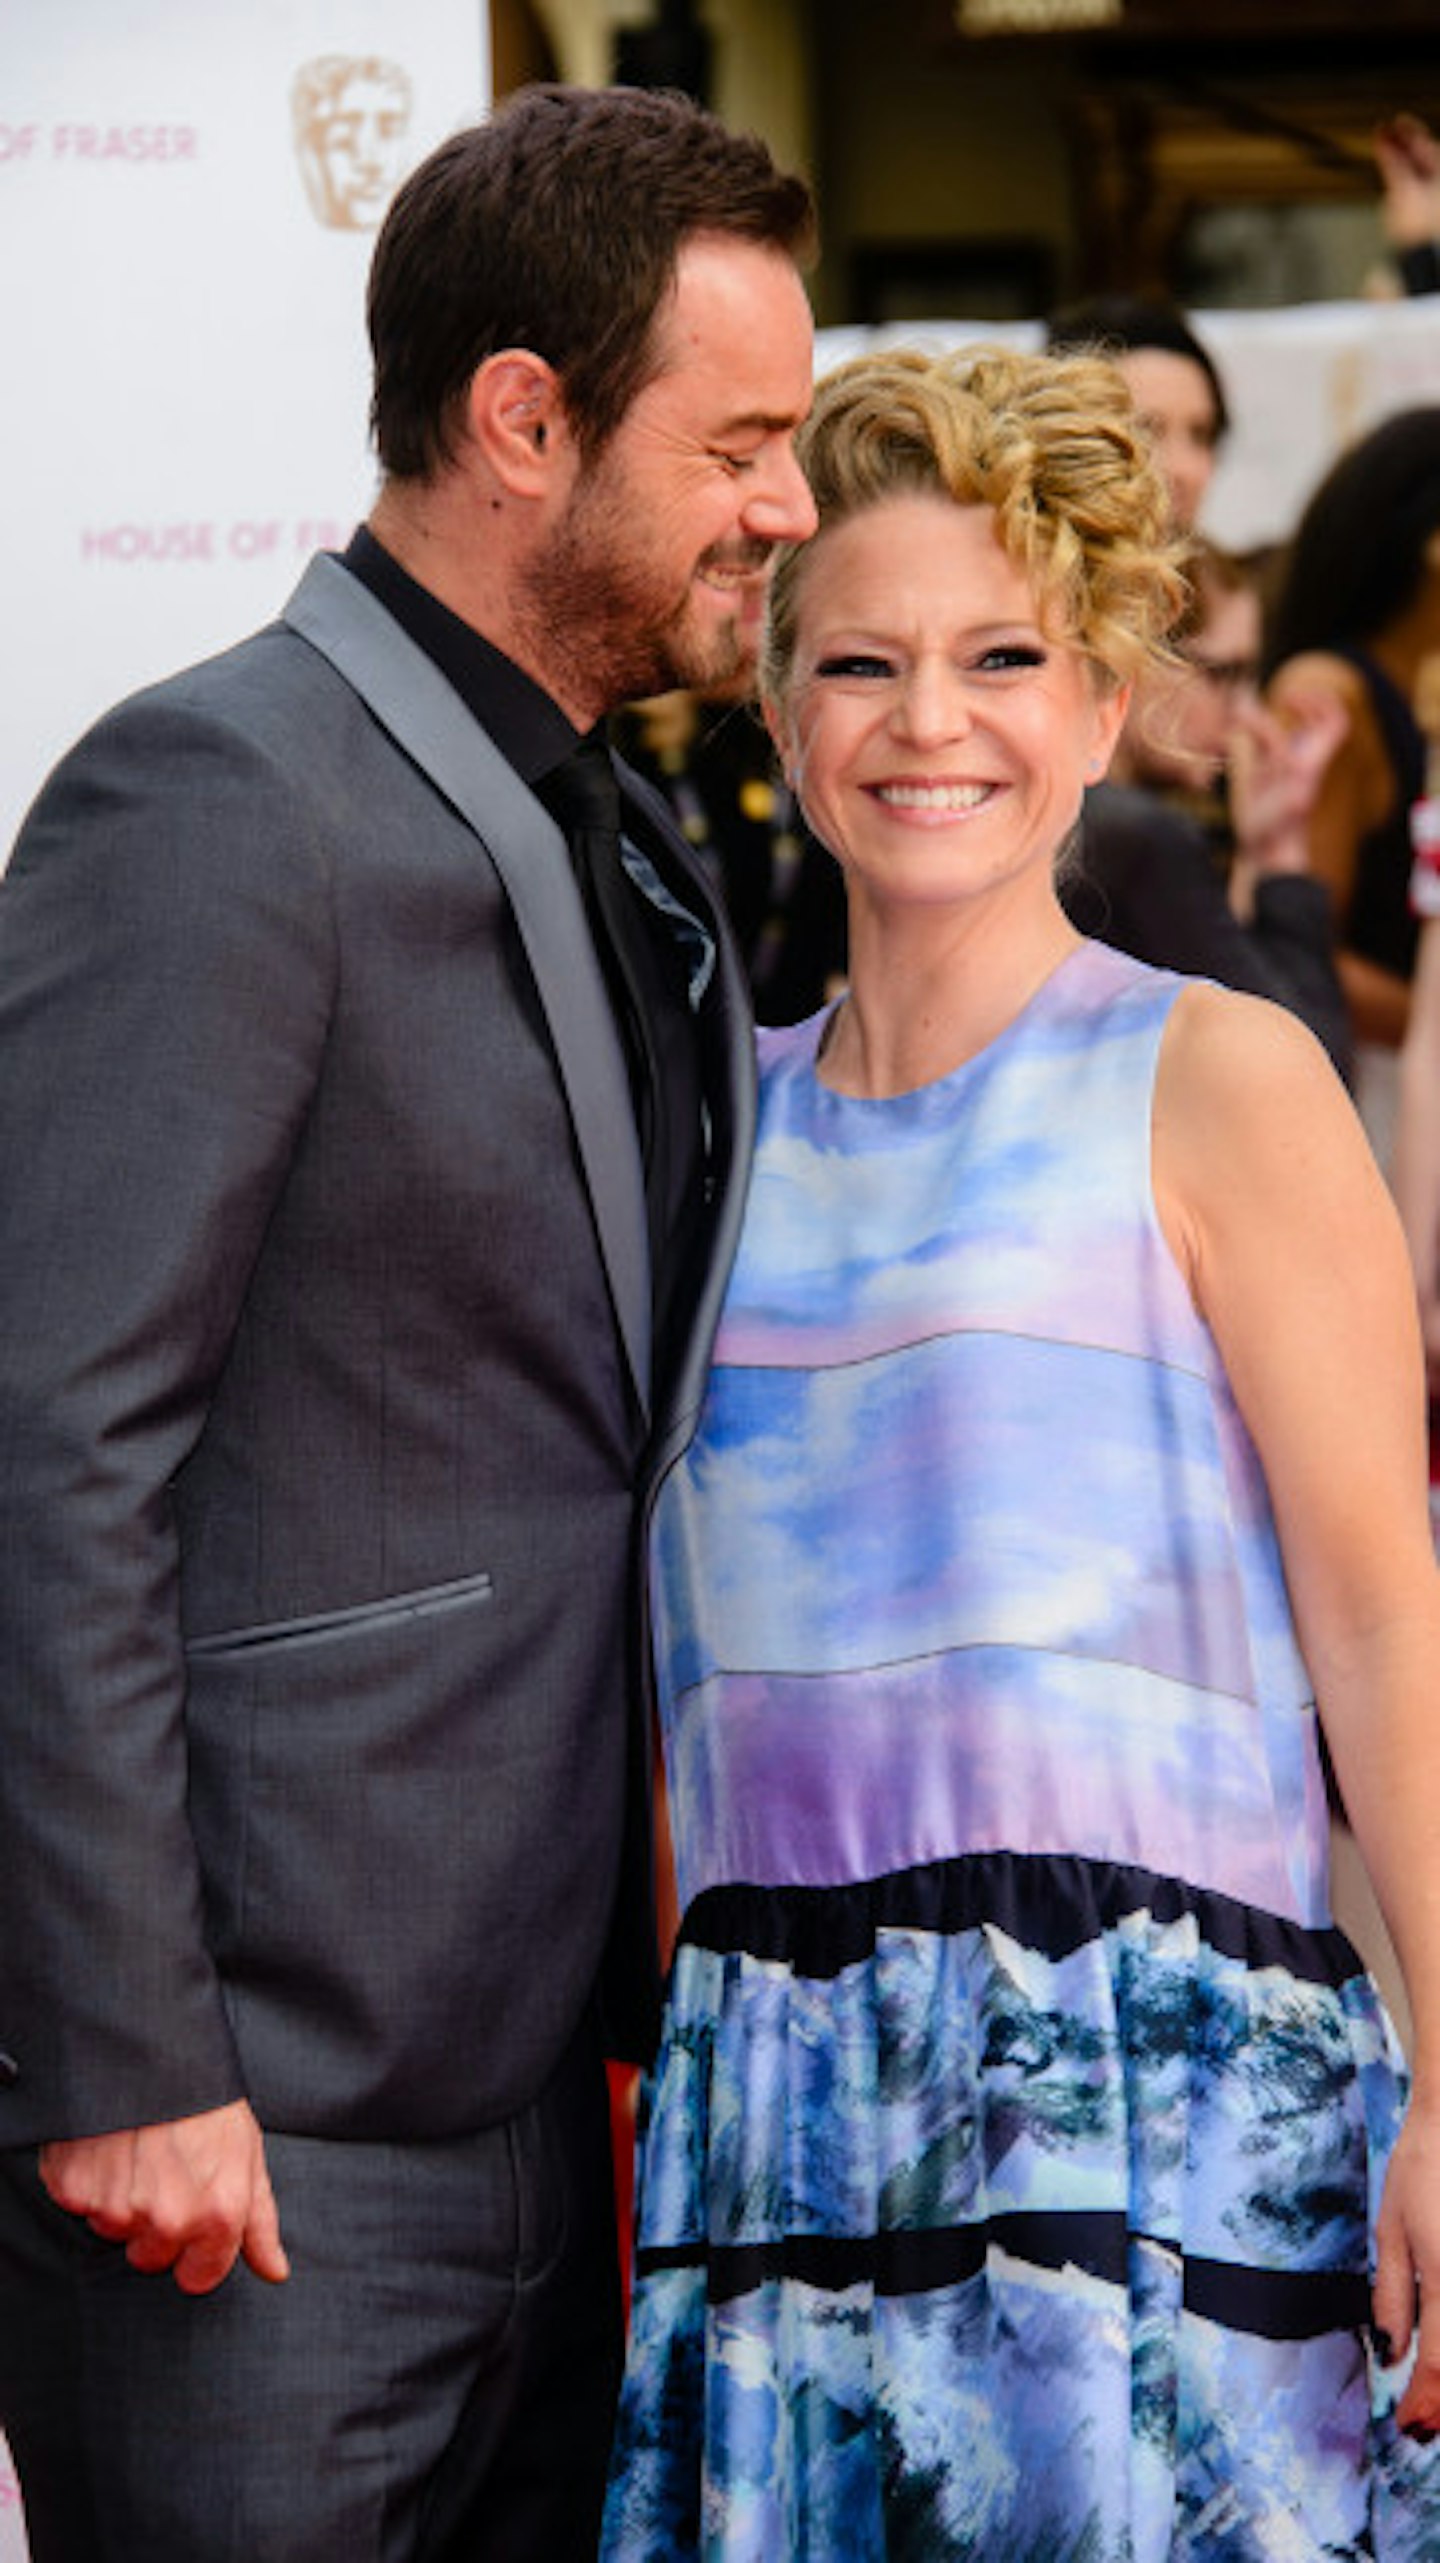 Danny Dyer and on-screen wife, Kellie Bright